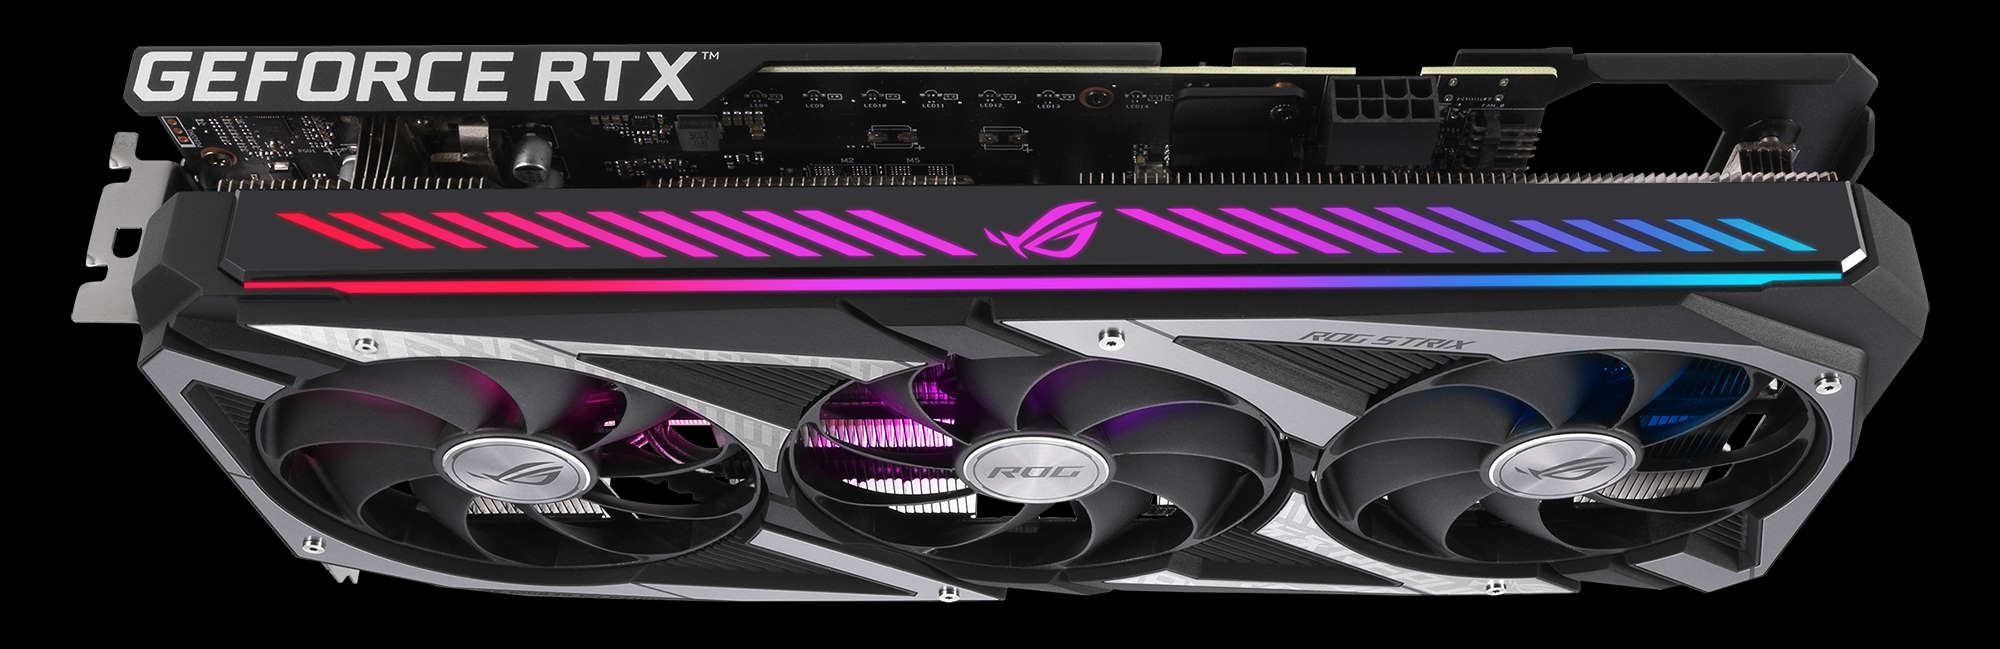 ASUS GeForce RTX 3060 graphics cards make a triple threat with ROG Strix,  TUF Gaming, and Dual